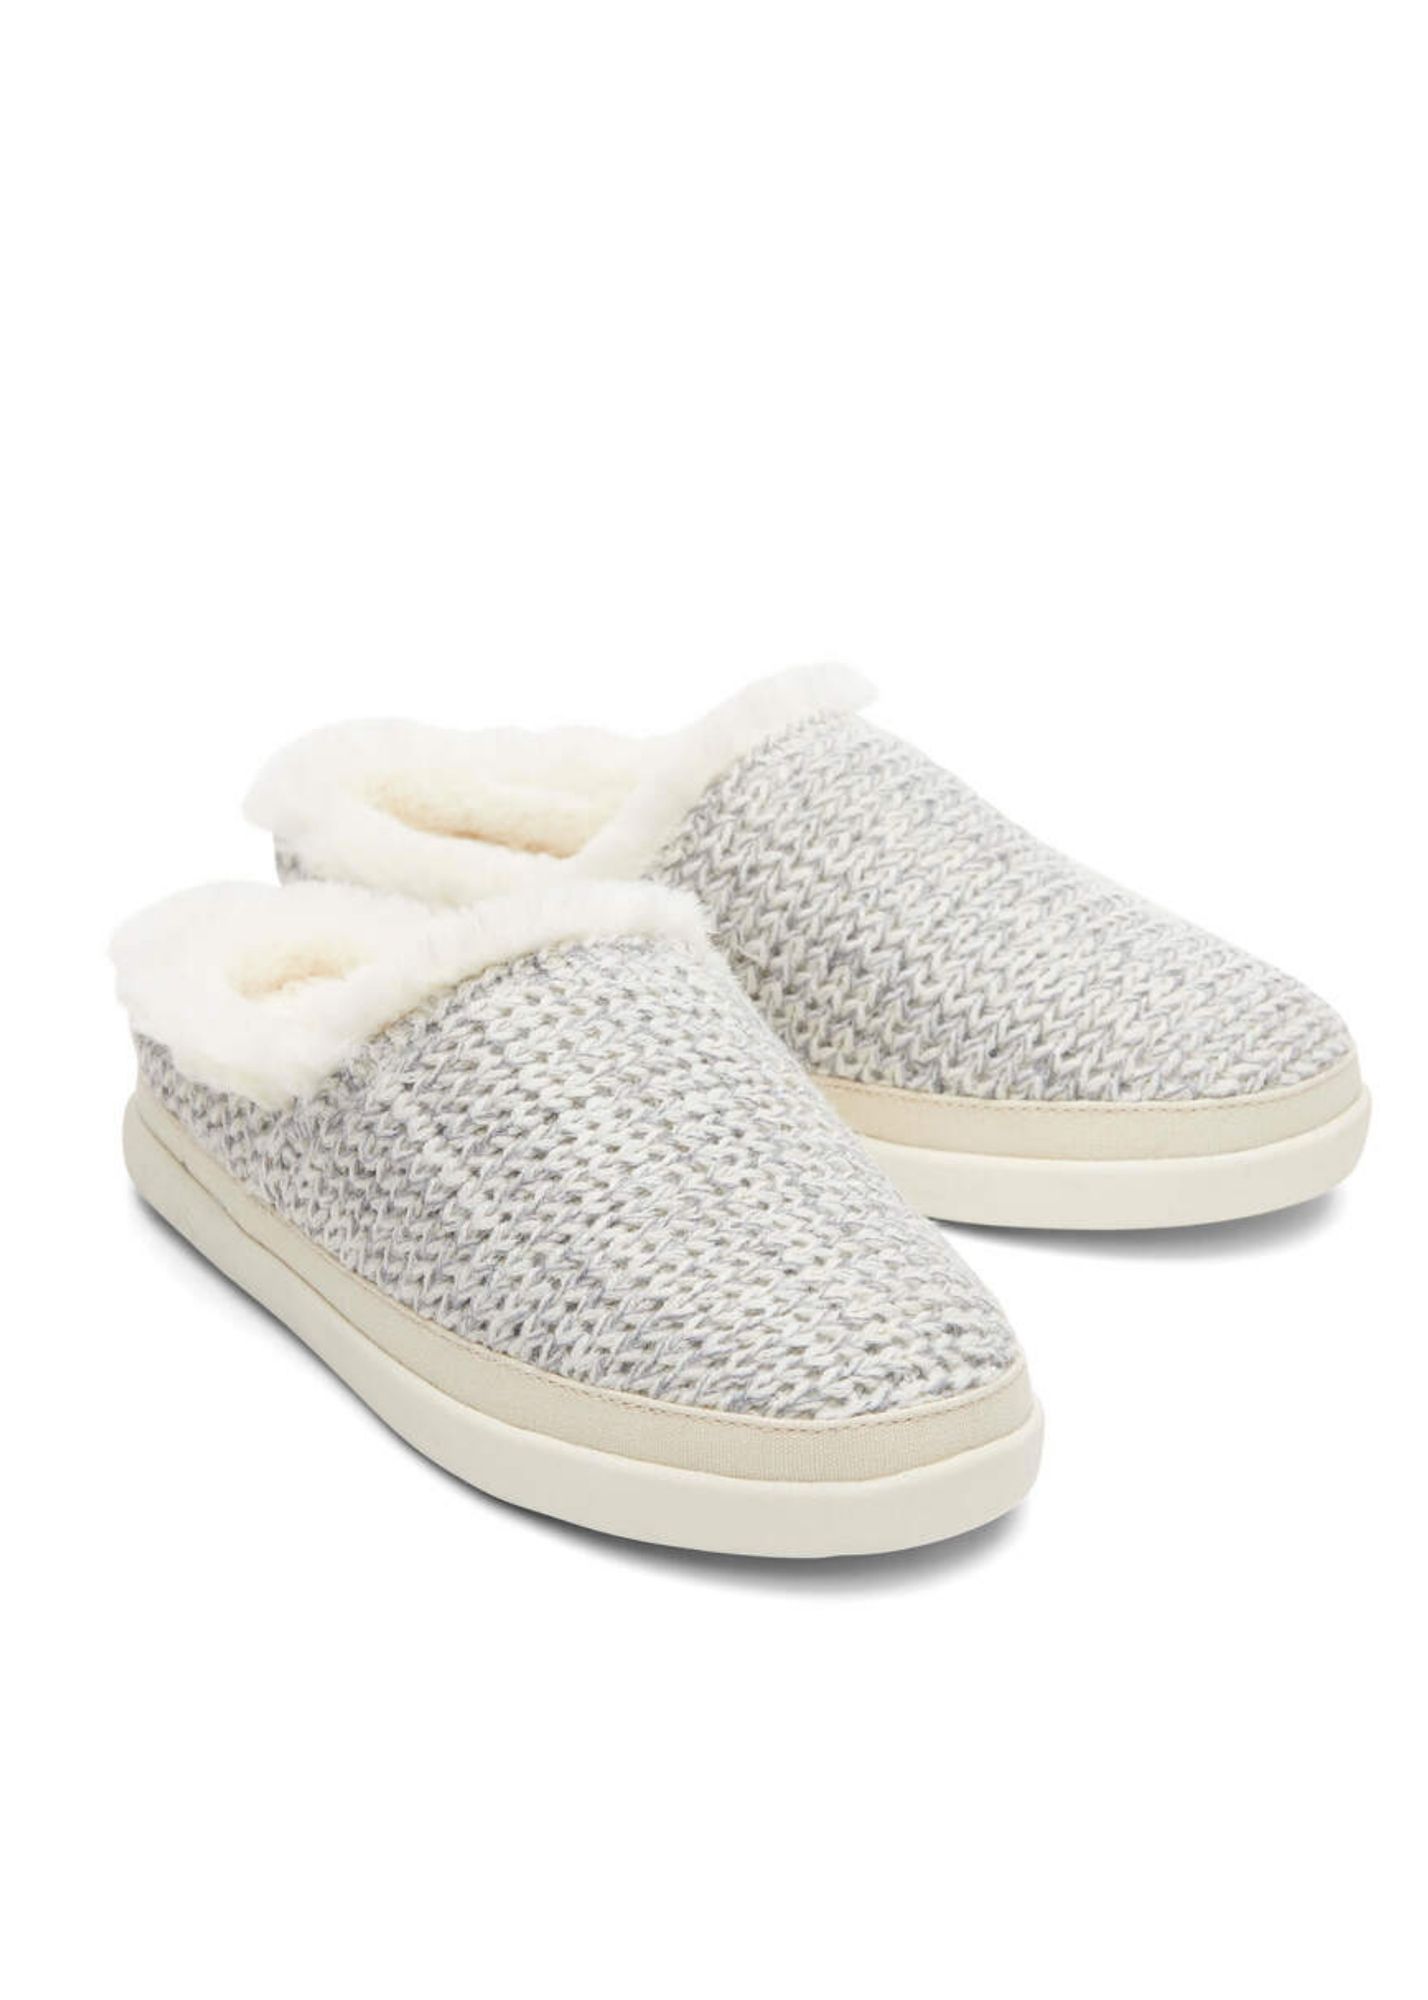 Toms® Gray Sweater Knit Slipper Shoes TOMS